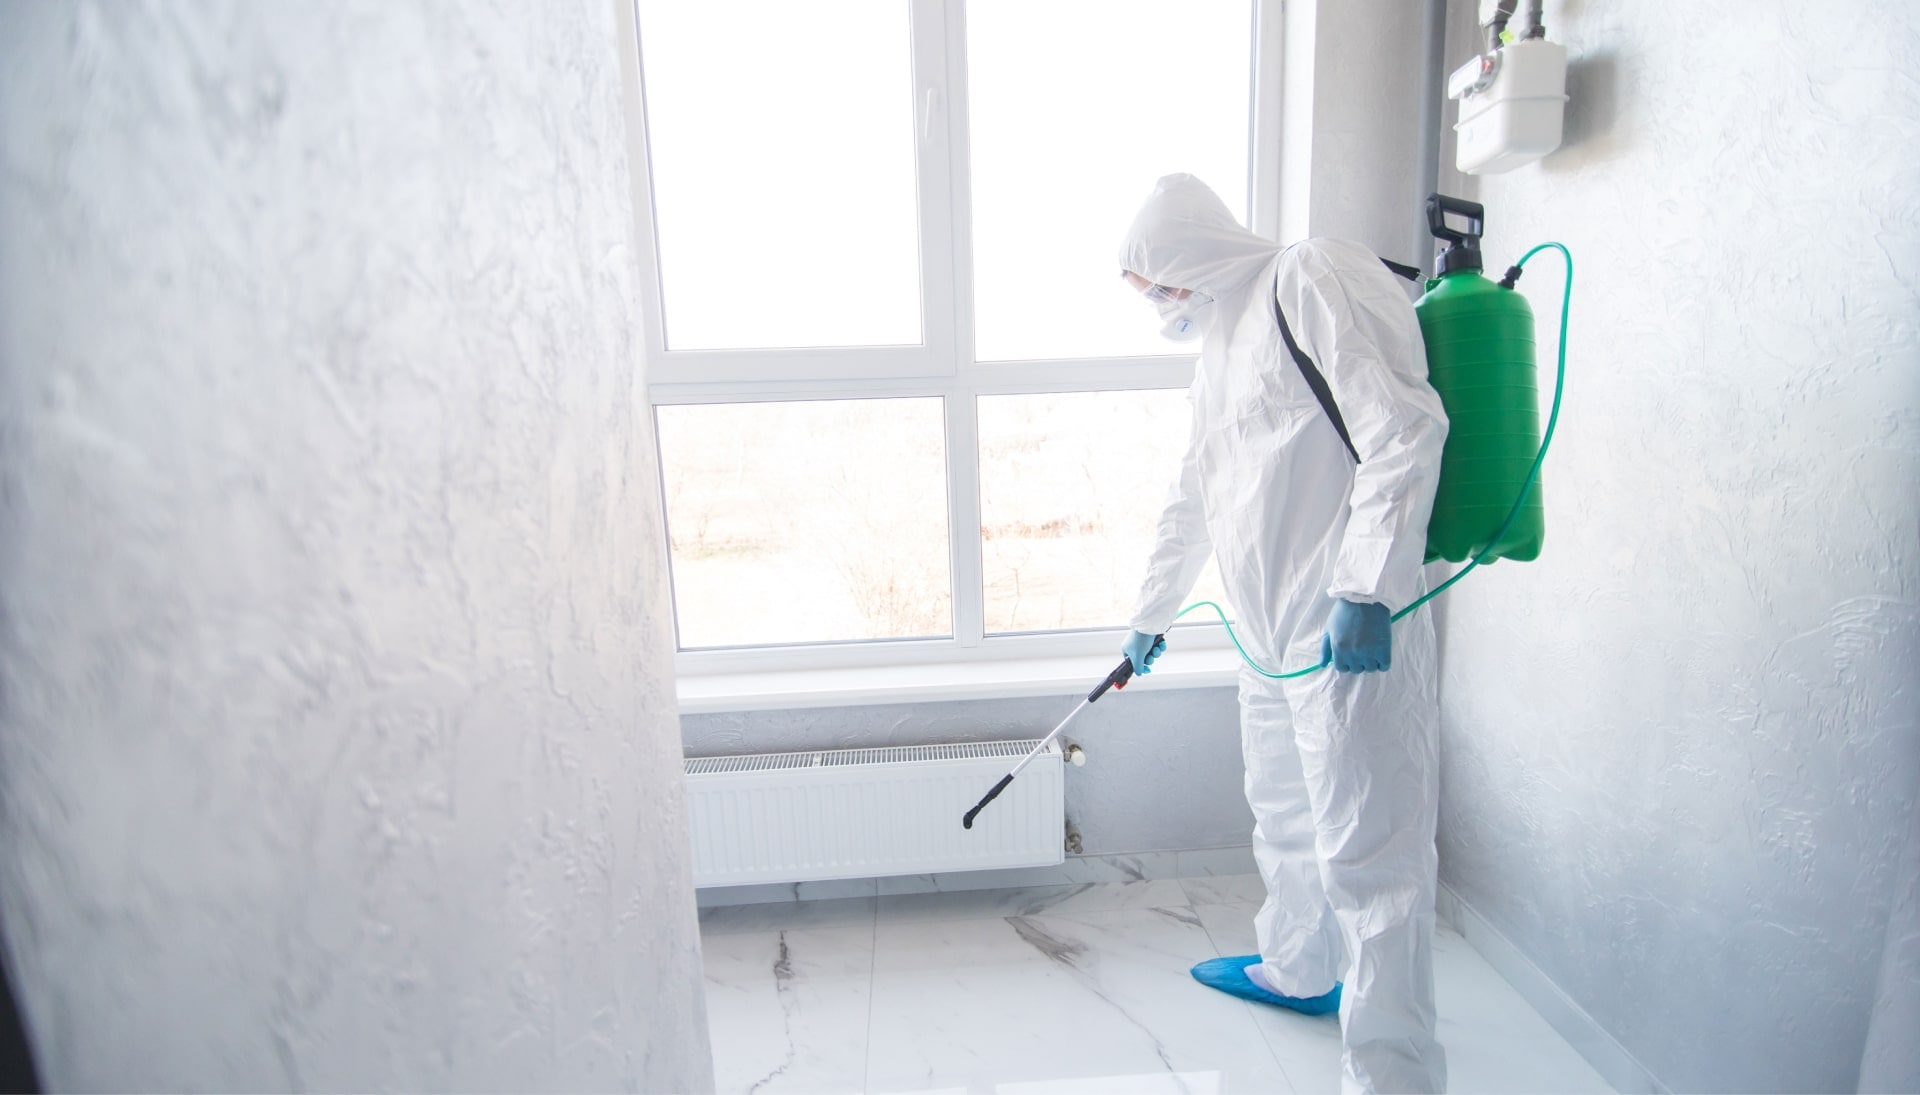 We provide the highest-quality mold inspection, testing, and removal services in the Burbank, California area.